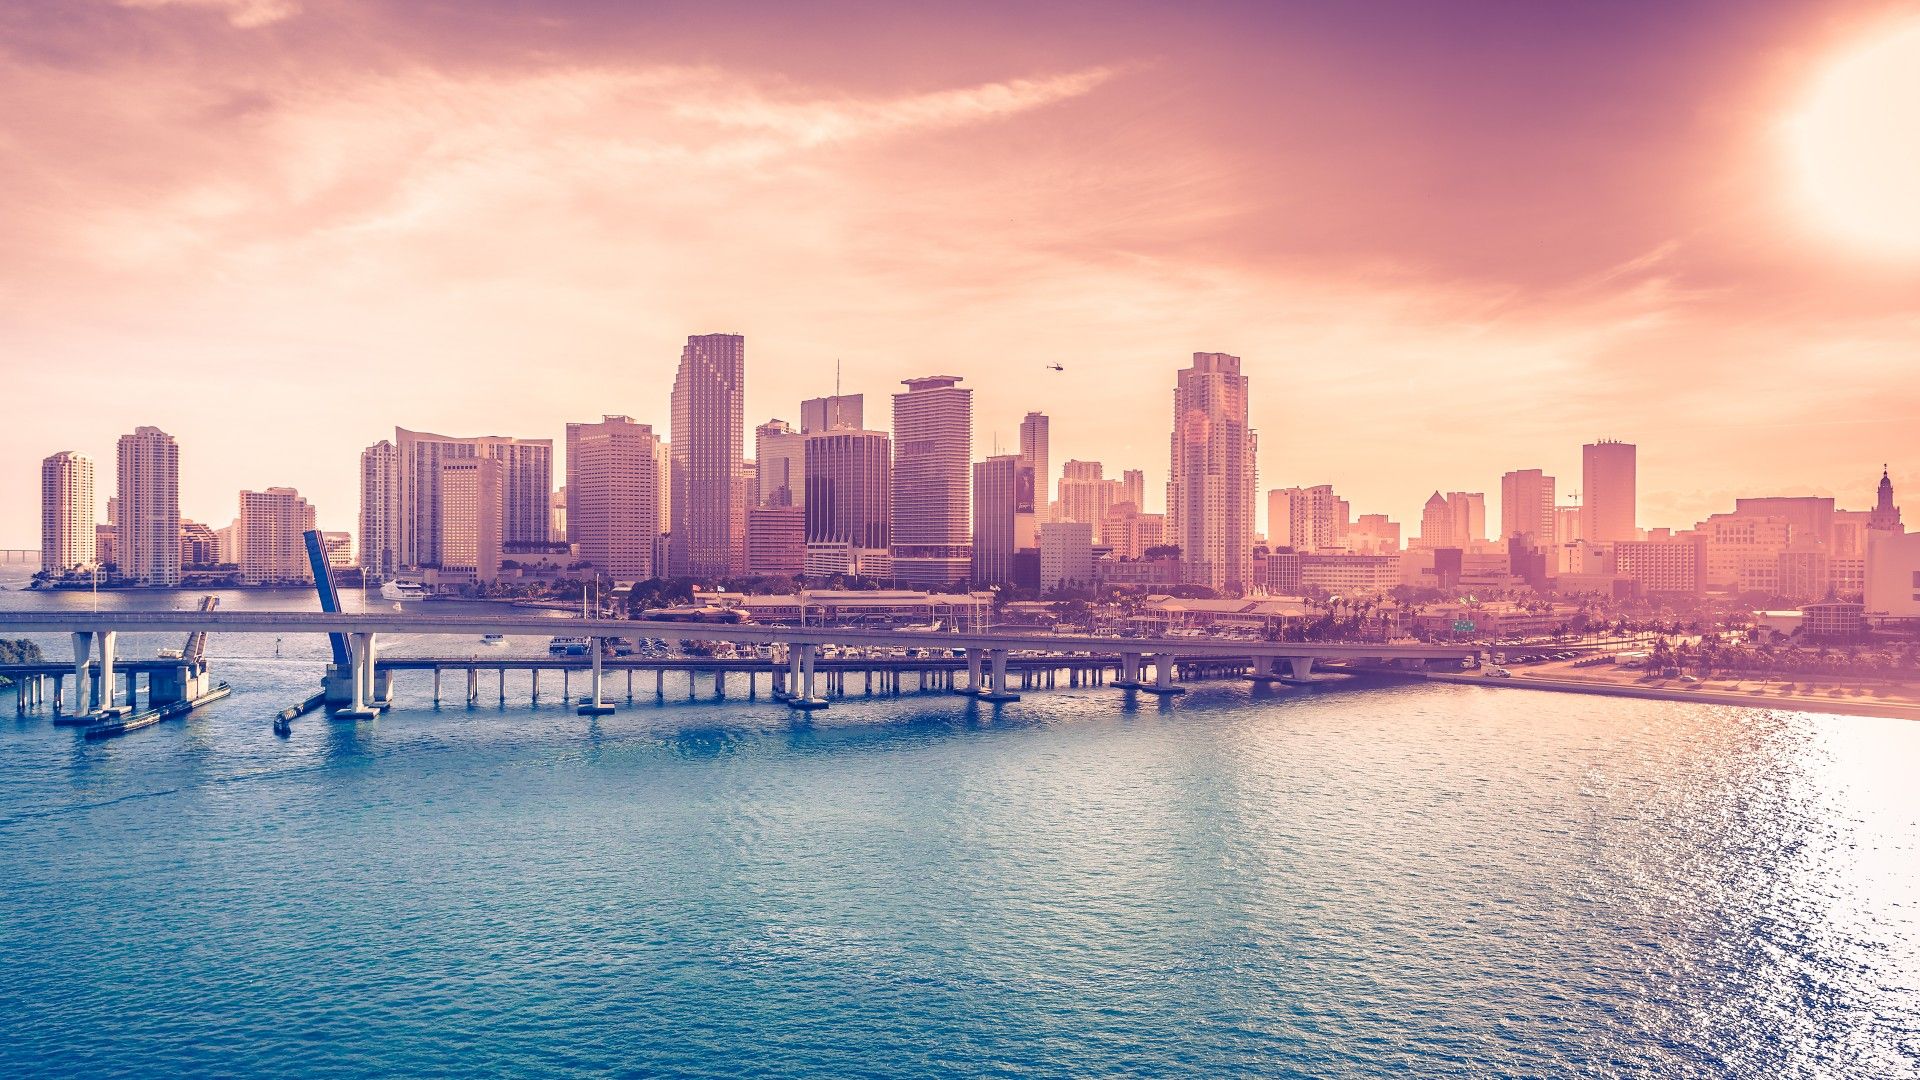 A city skyline with tall buildings on the shore of a body of water - Miami